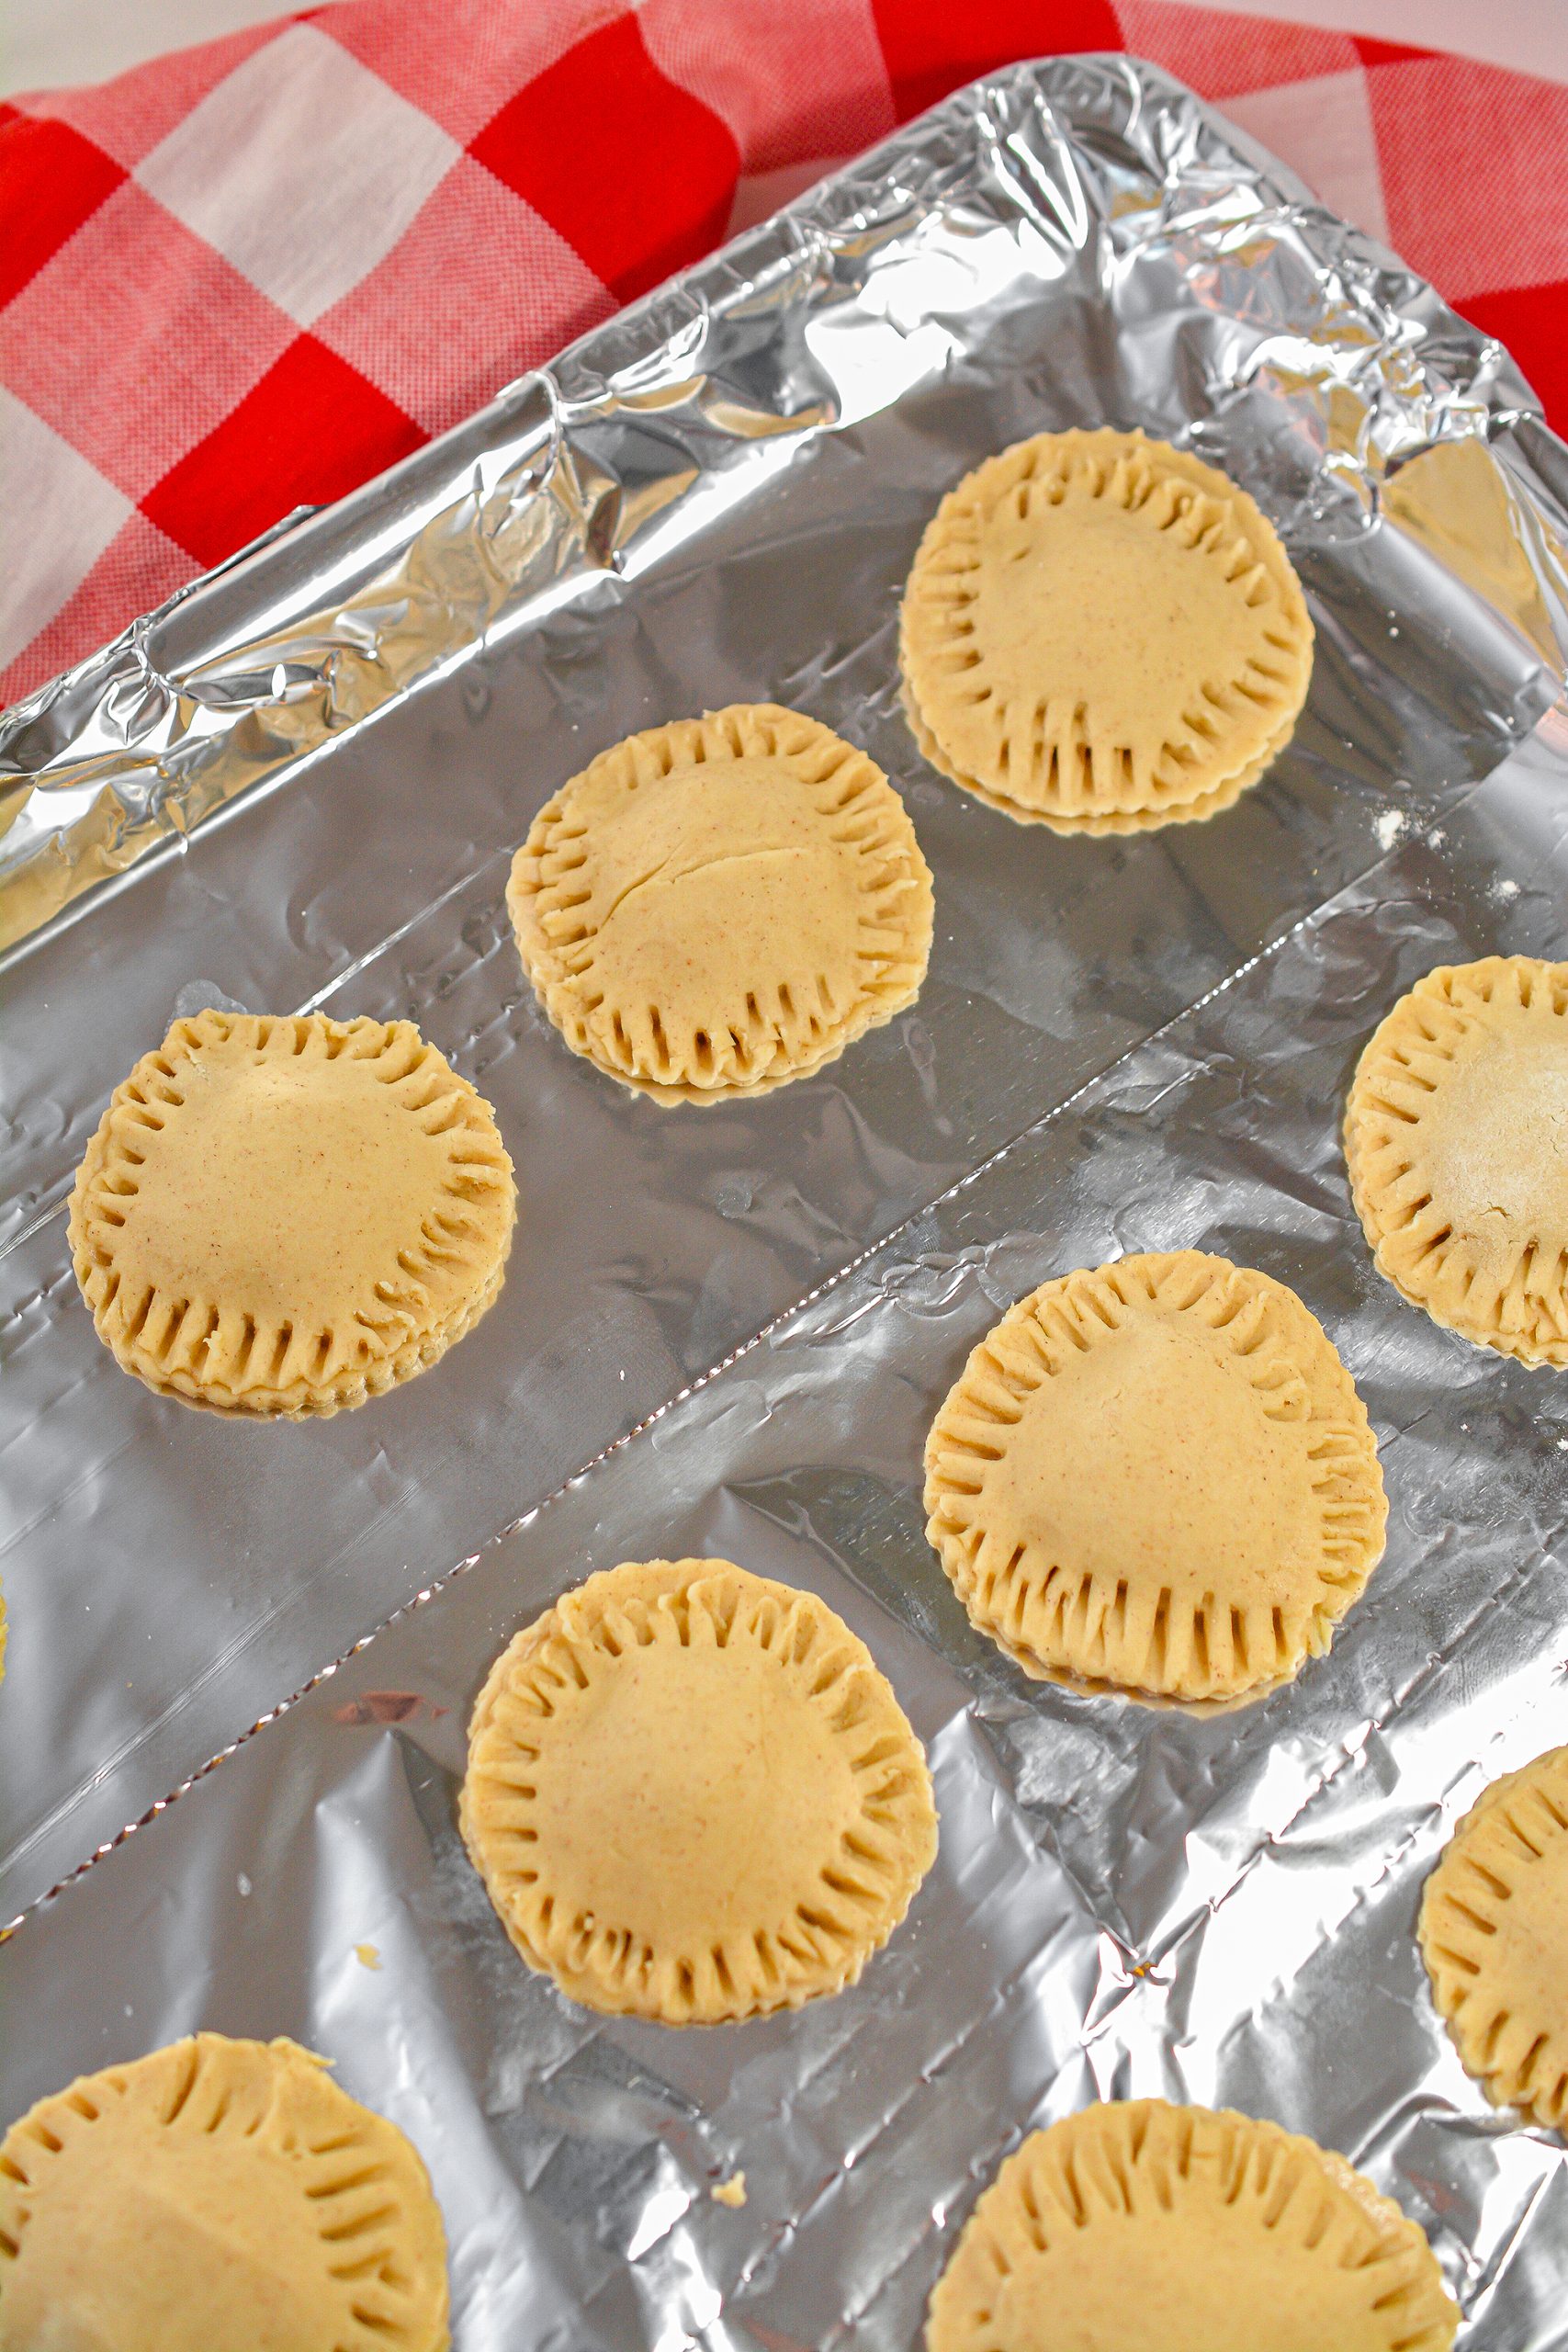 Cover the filling with another circle of dough on top, and use the tines of a form to crimp the edges of each filled cookie closed.